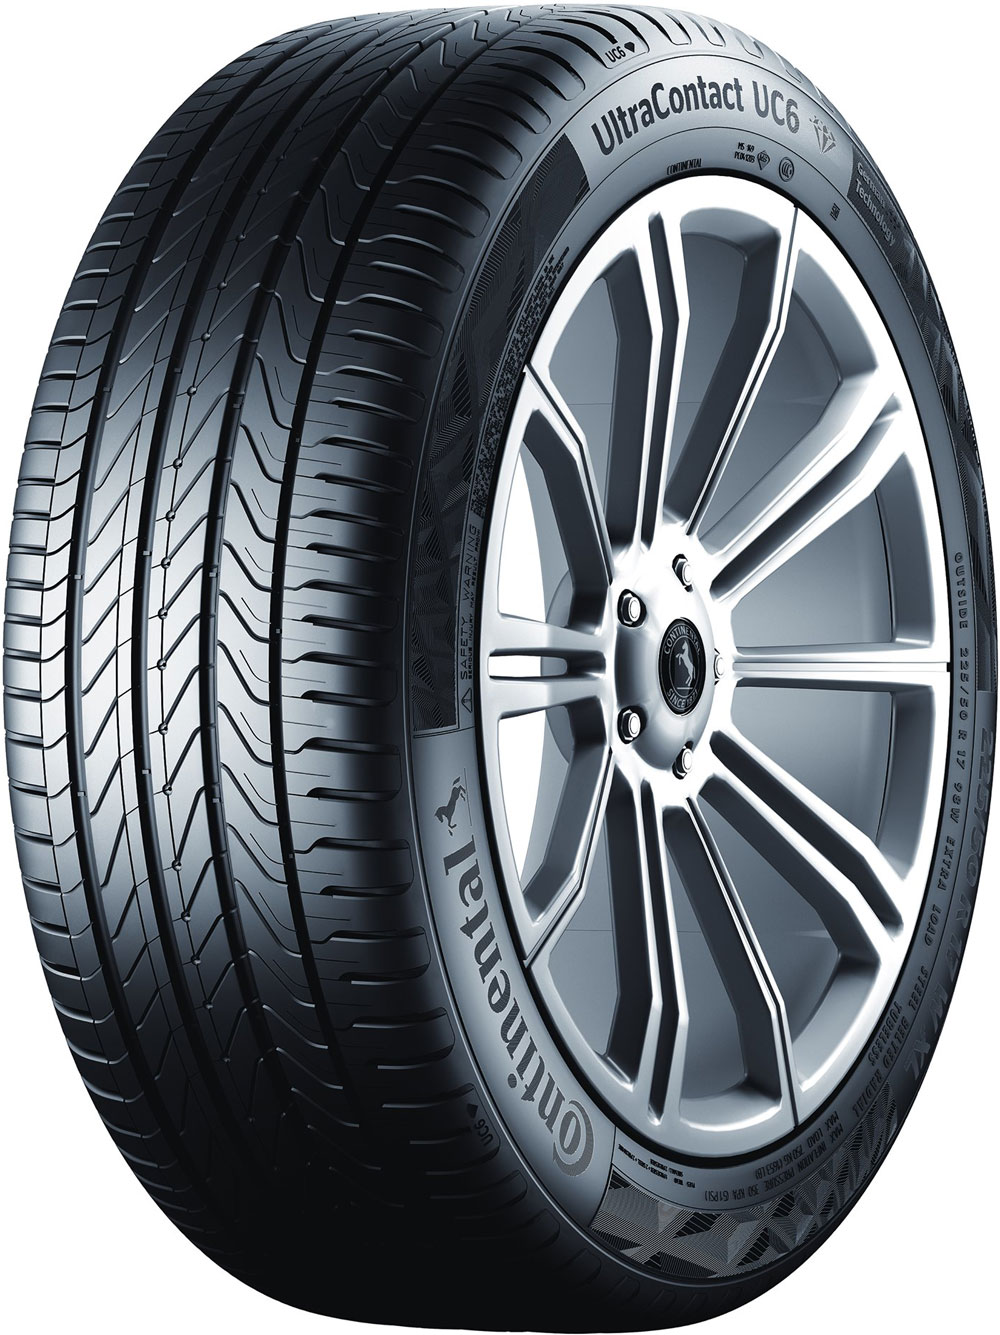 CONTINENTAL ULTRA CONTACT 185/60 R15 84T